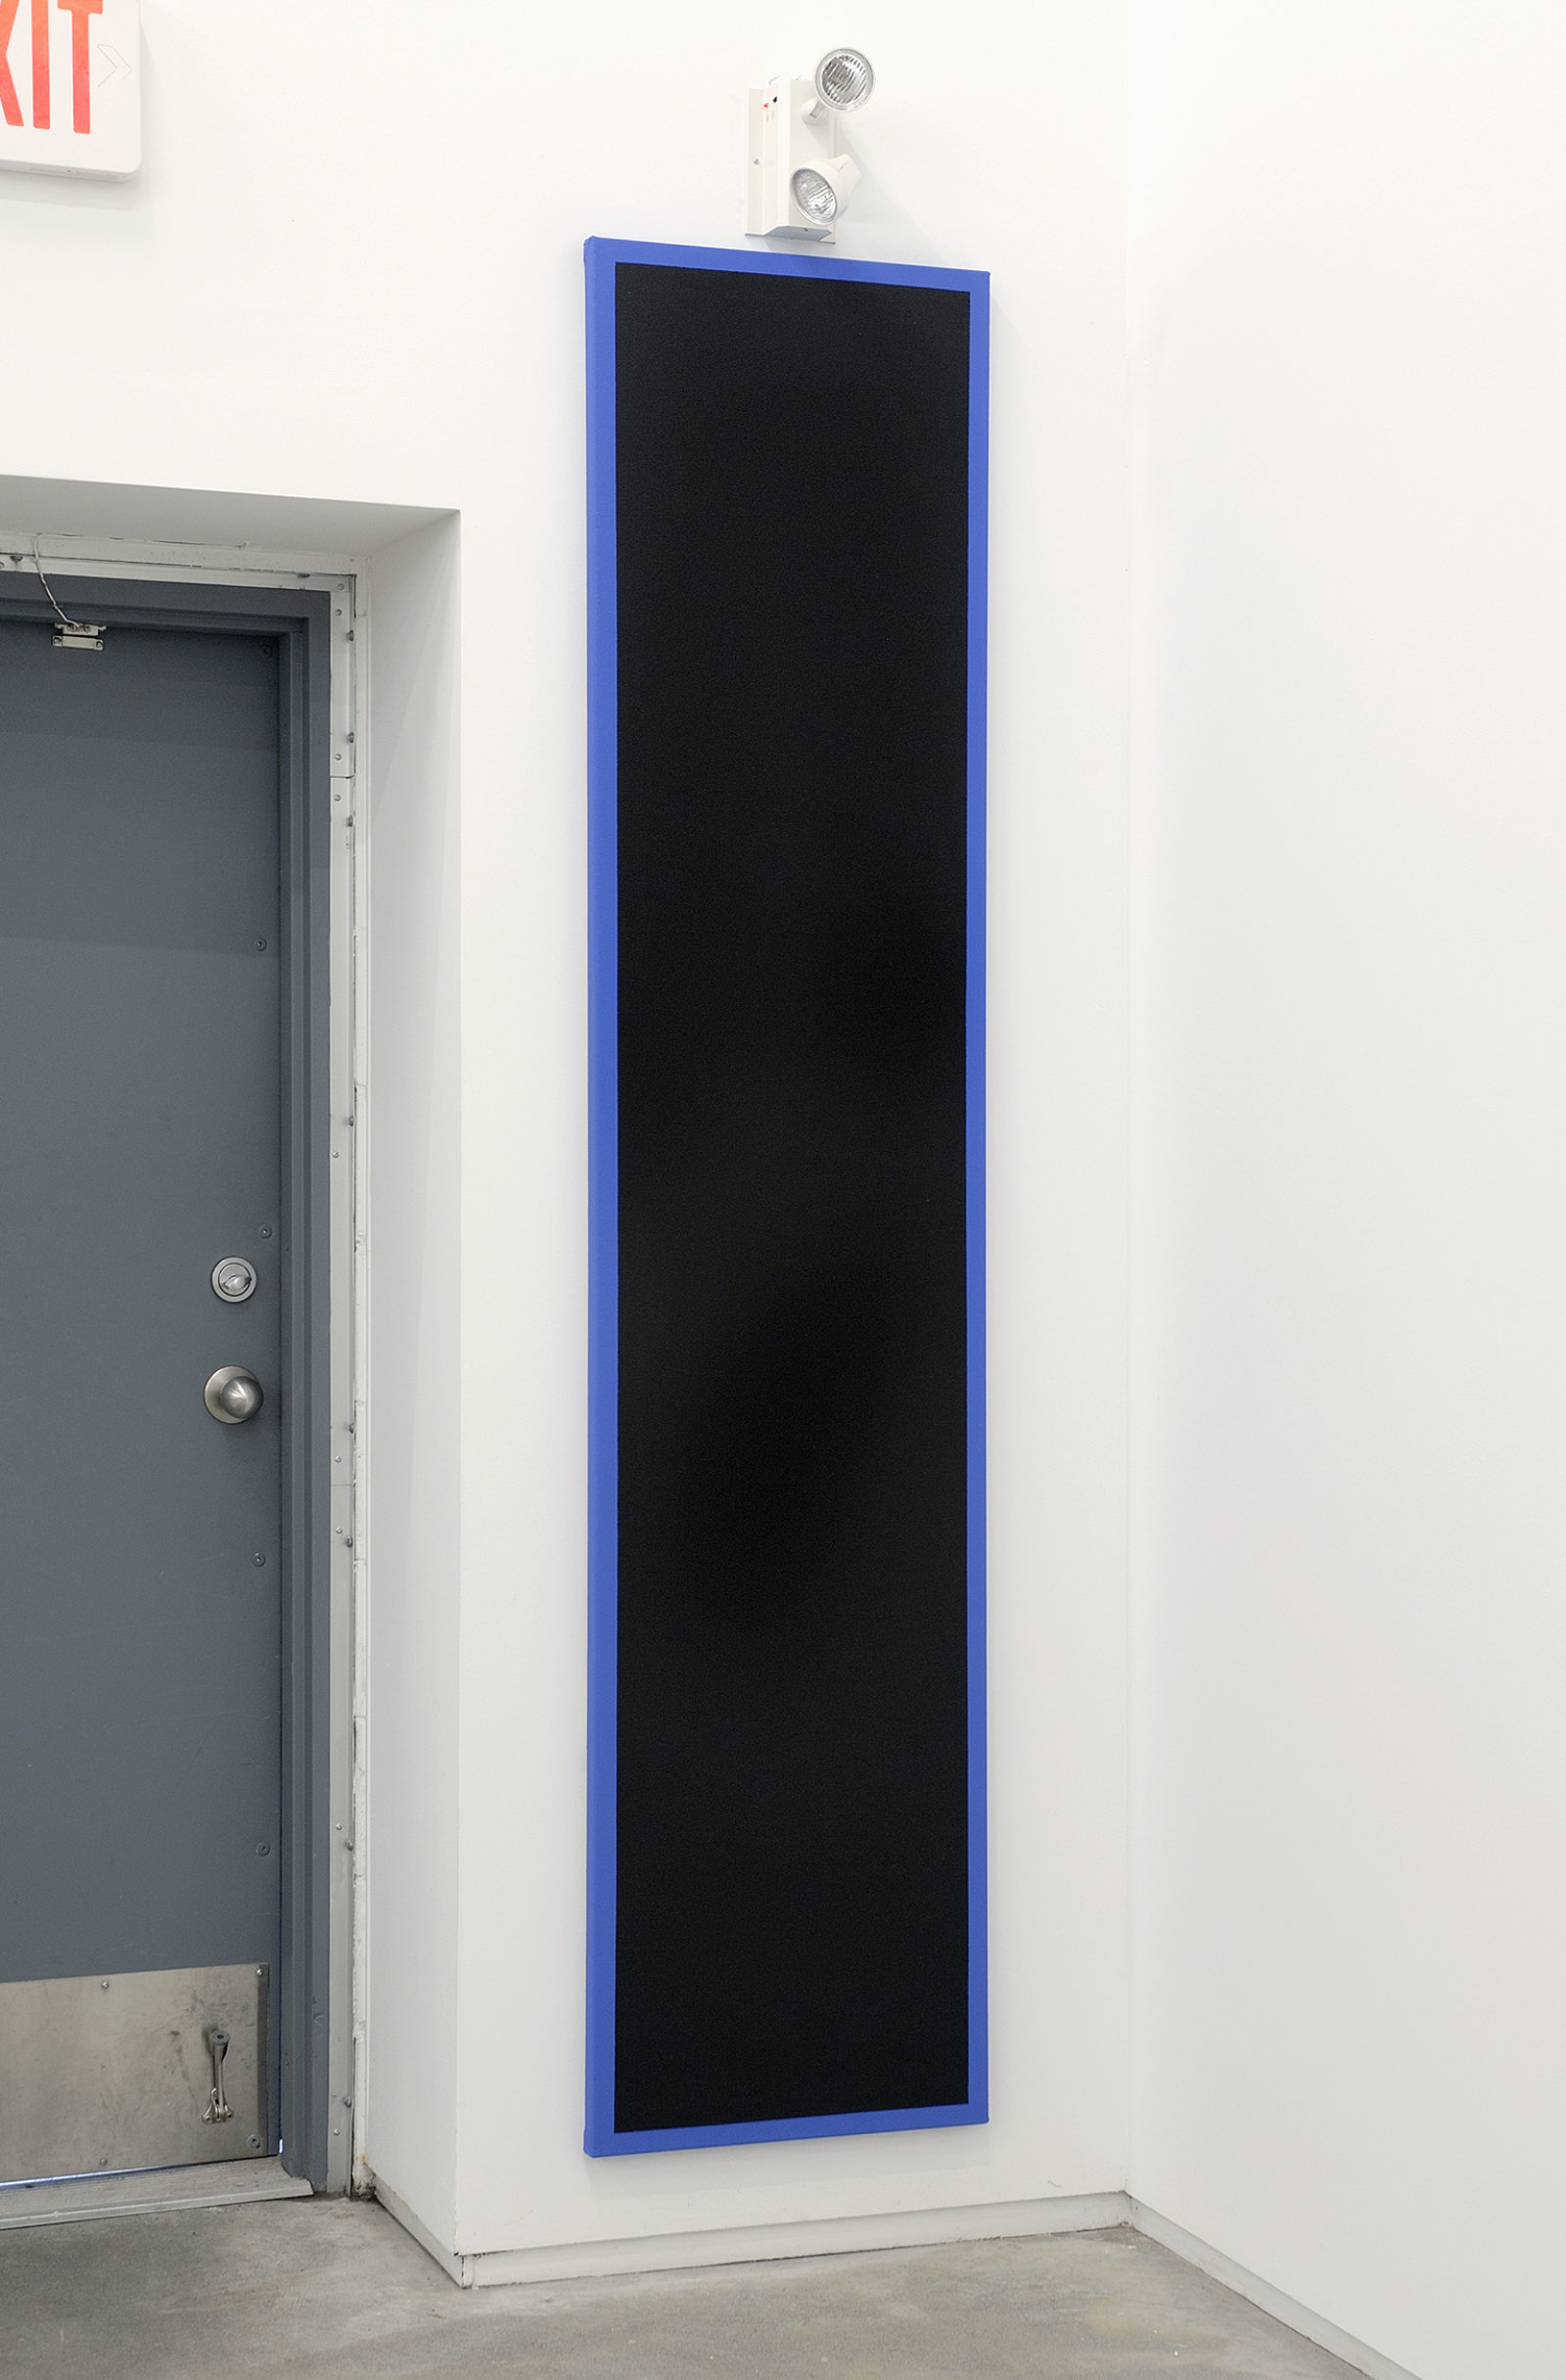 Ian Wallace, Untitled (Black Monochrome with Blue), 1967–2007, acrylic on canvas, 90 x 20 in. (229 x 51 cm)